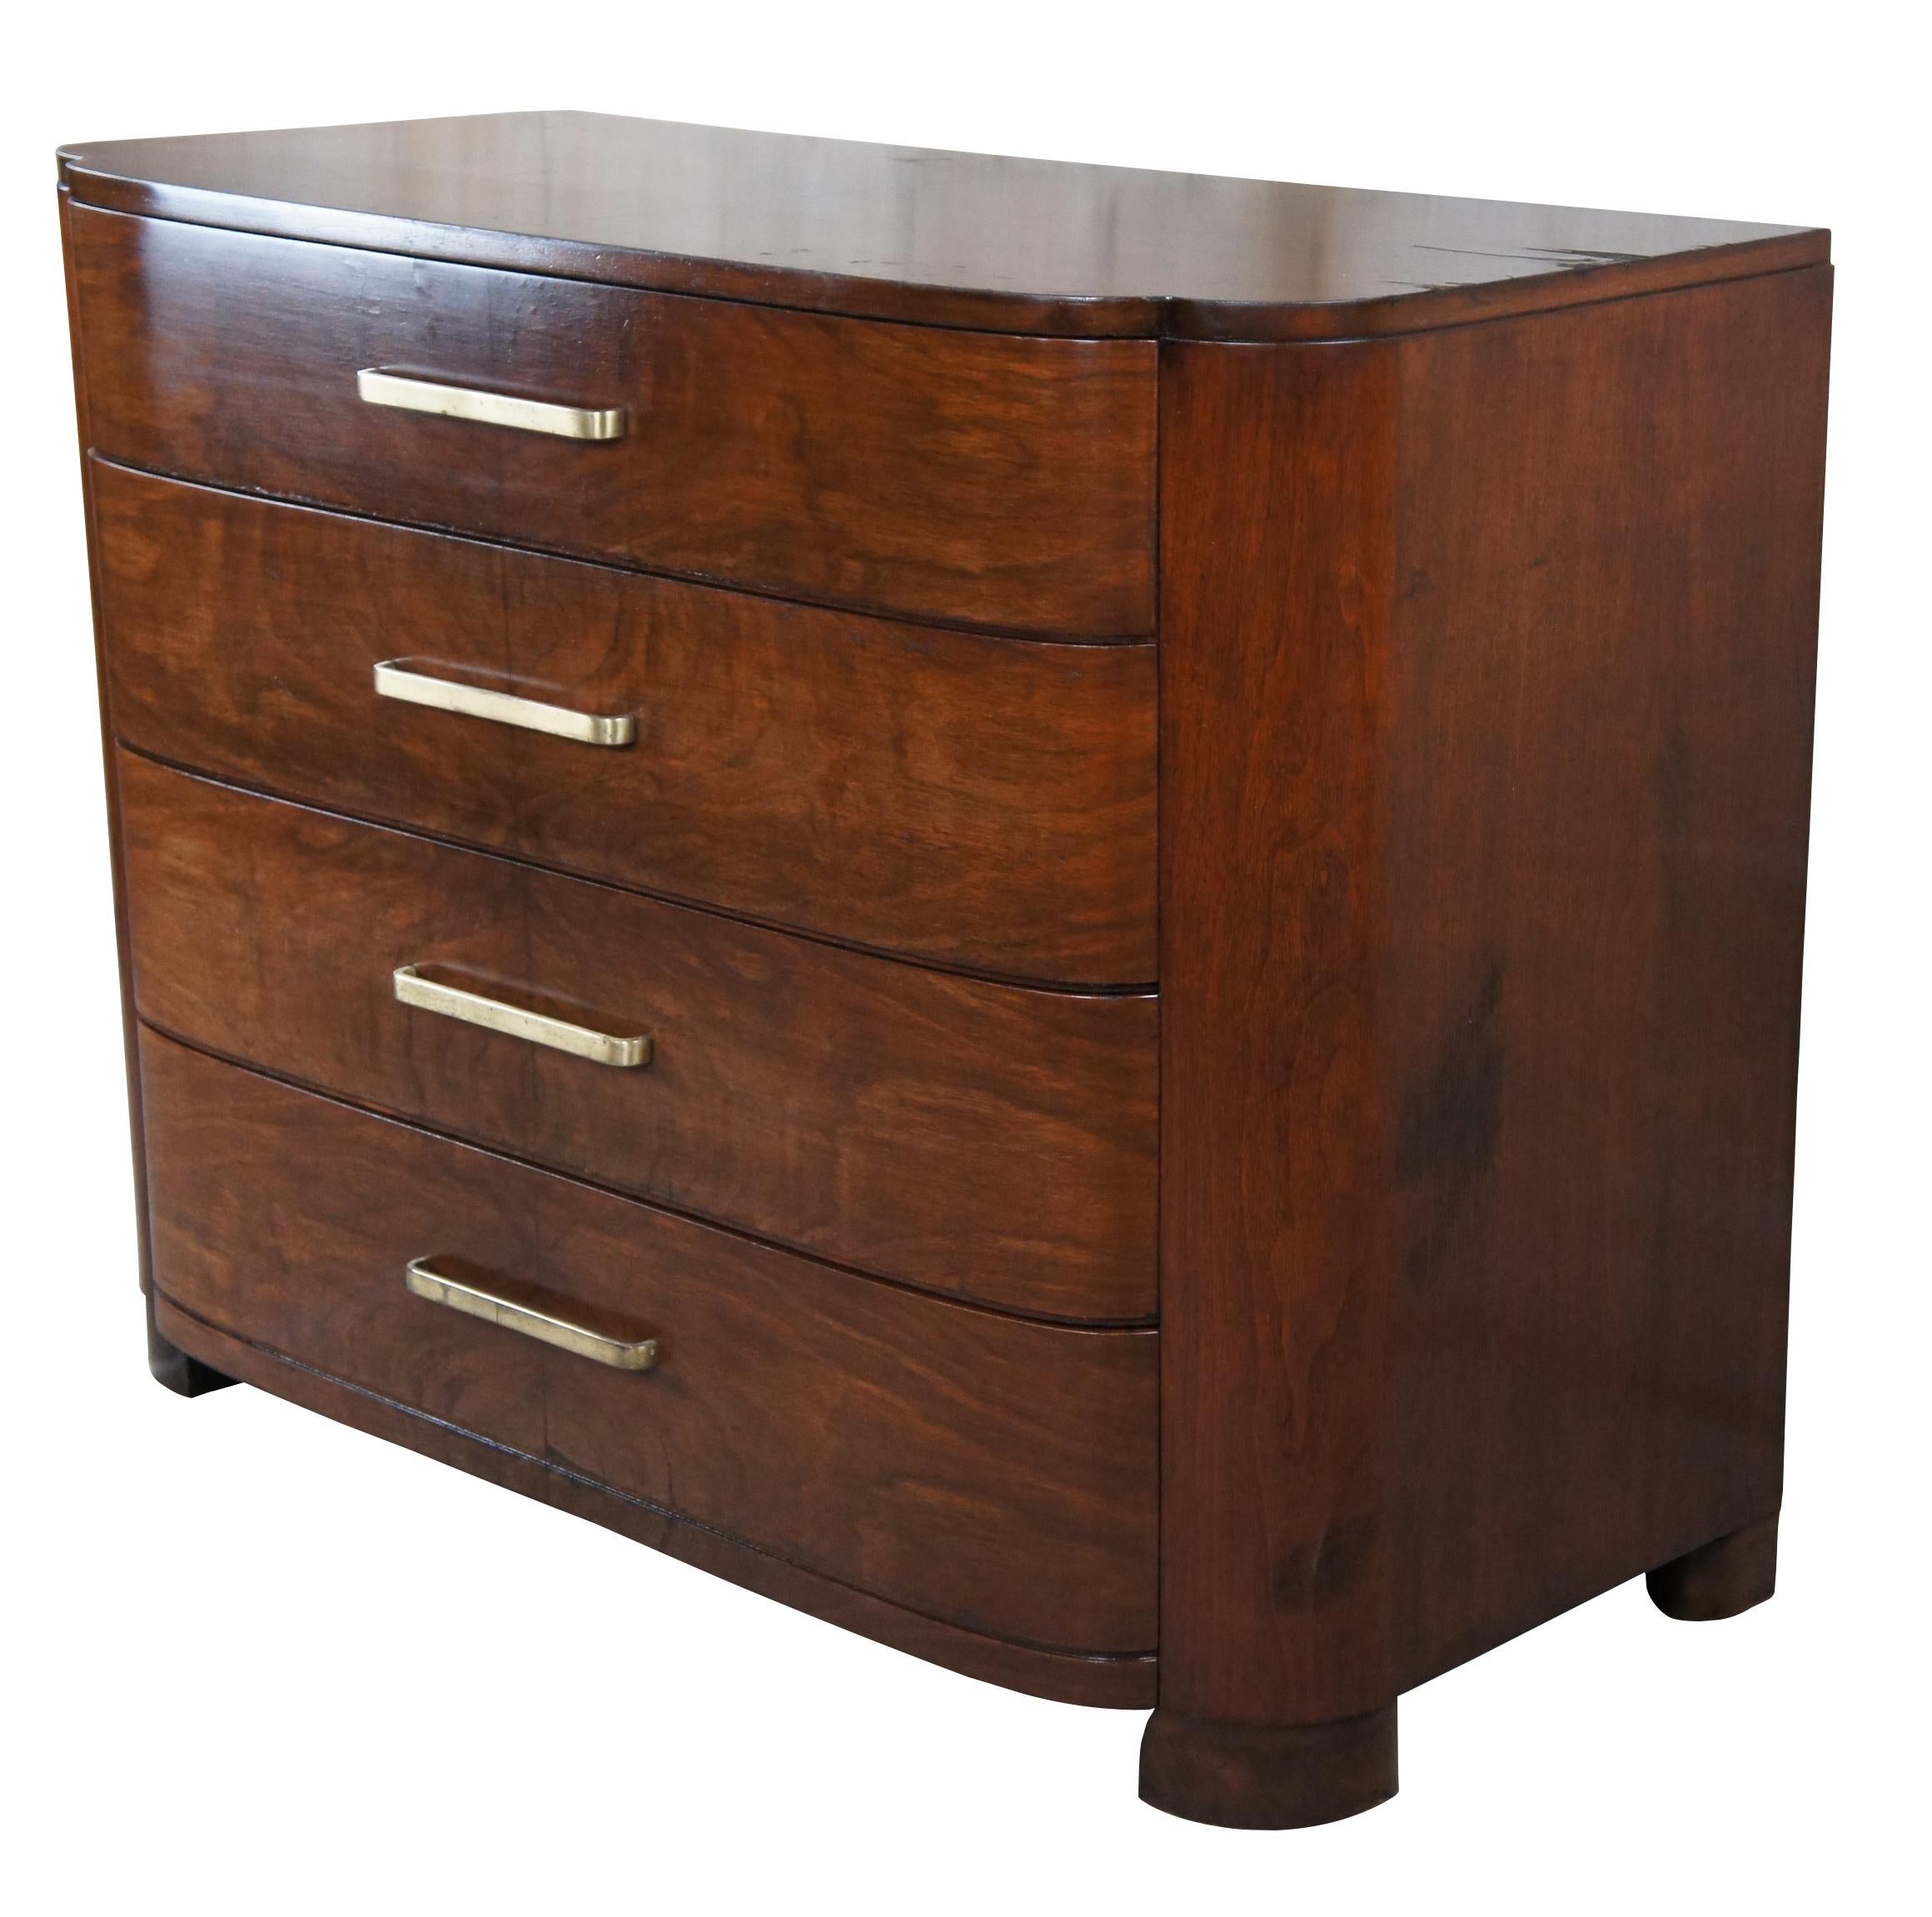 American Late Art Deco nightstand, Circa 1940s. Made from walnut with a contoured front, two dovetailed matchbook walnut drawers and brass hardware. Size: 46